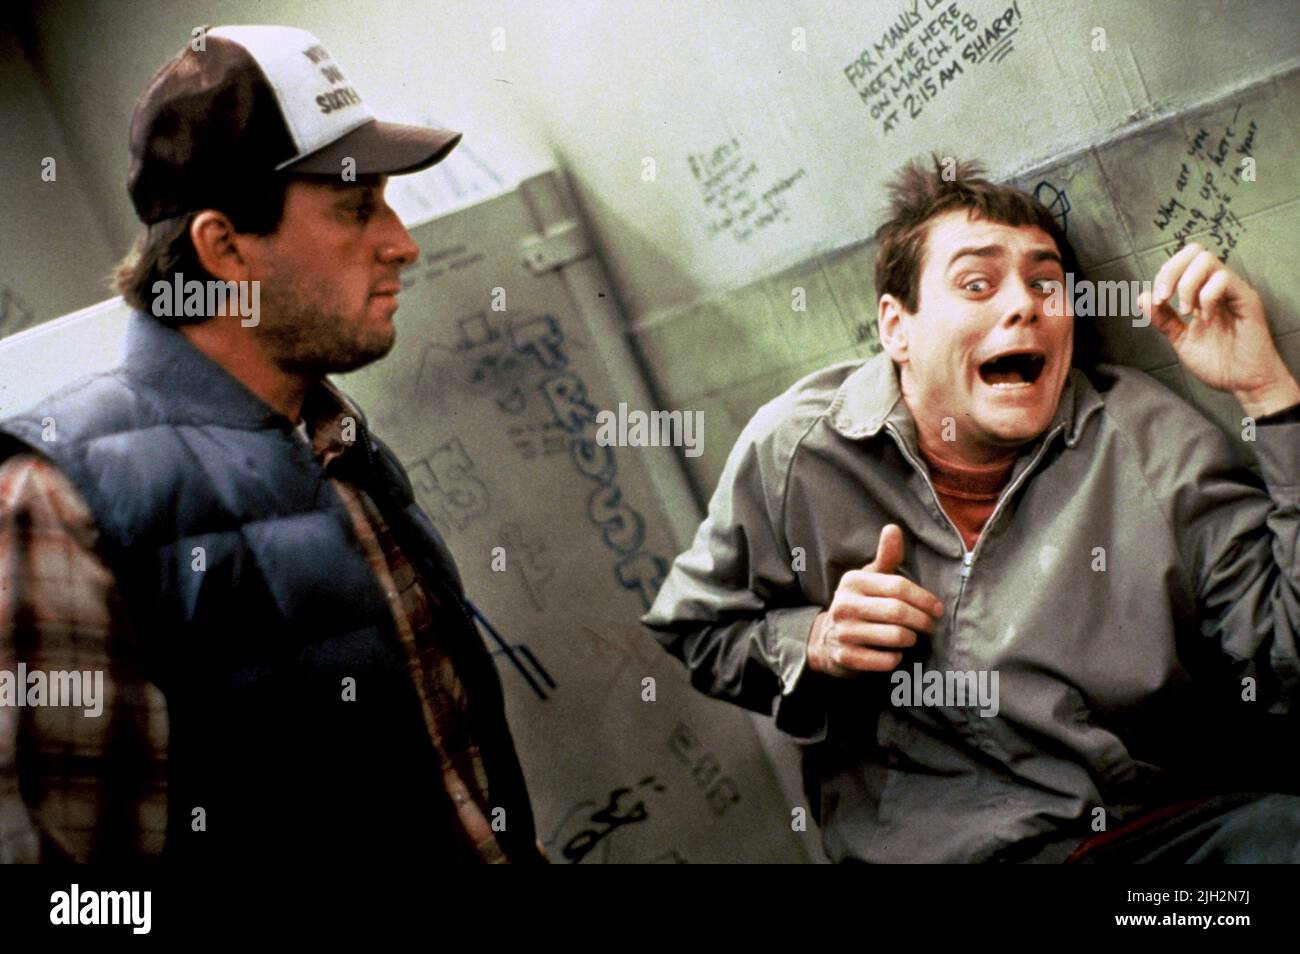 NEELY,CARREY, DUMB and DUMBER, 1994 Stock Photo